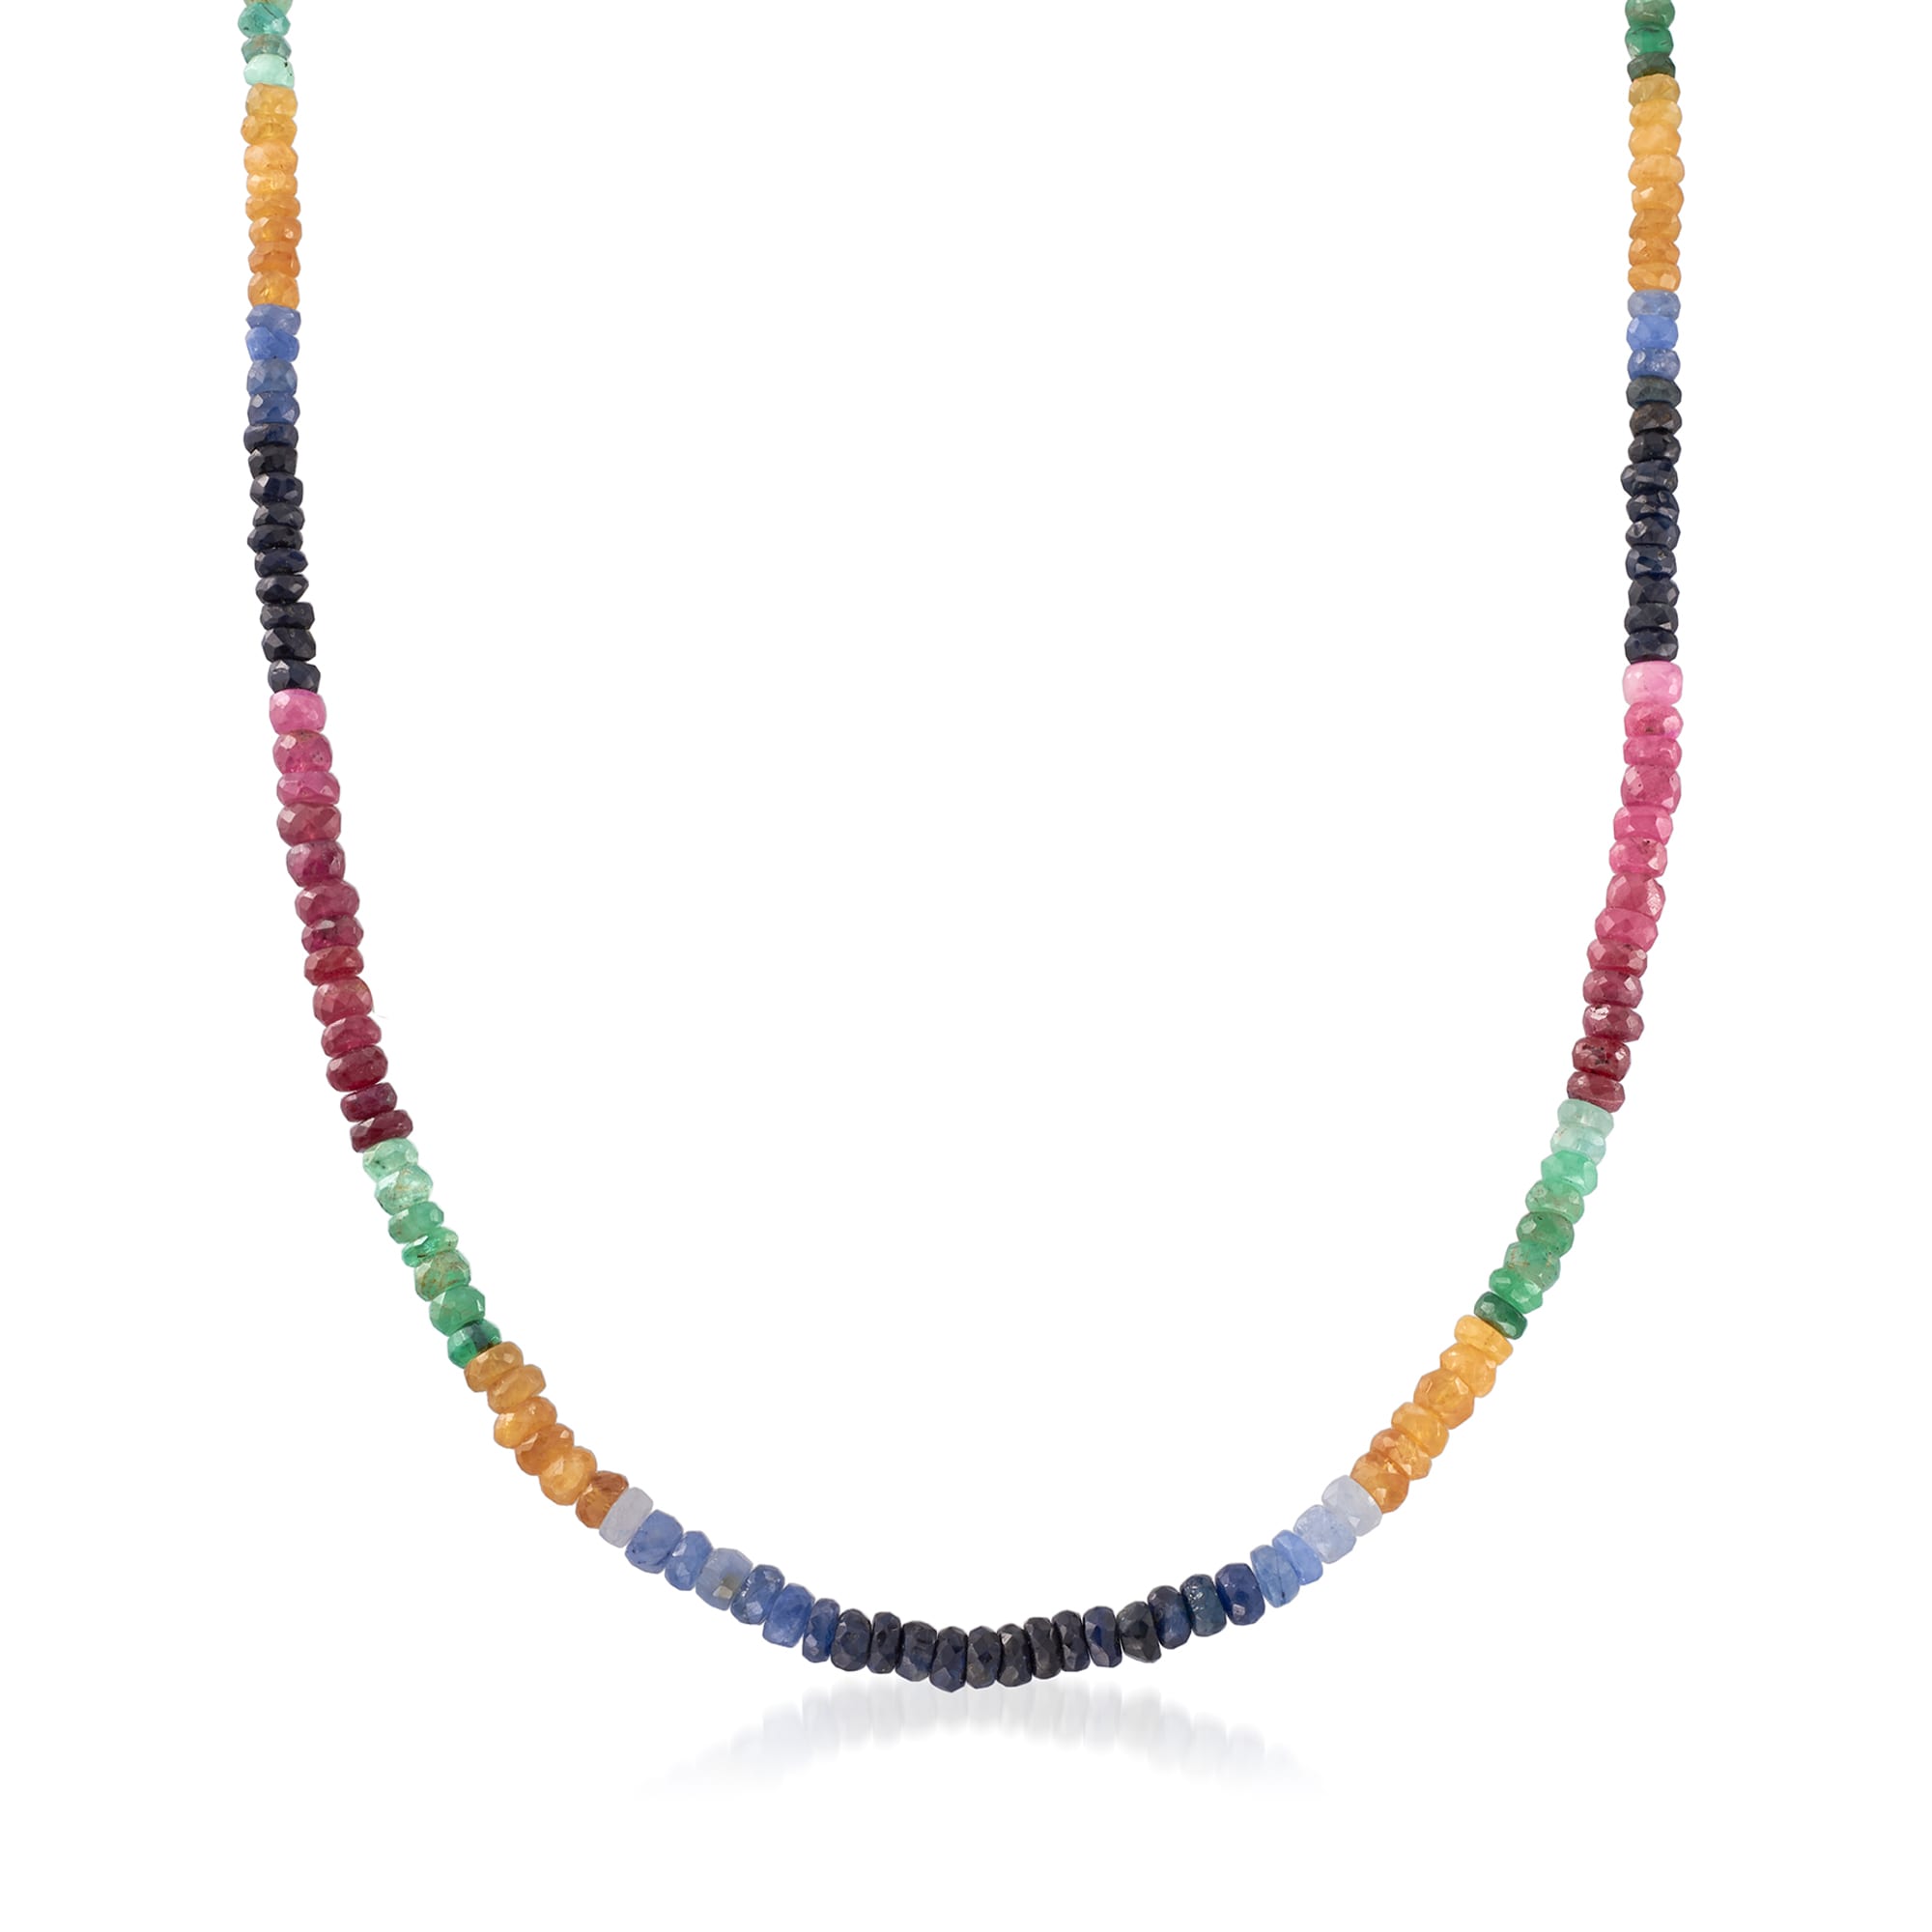 Multi-Gem Rondelle Bead Necklace with Sterling Silver | Ross-Simons